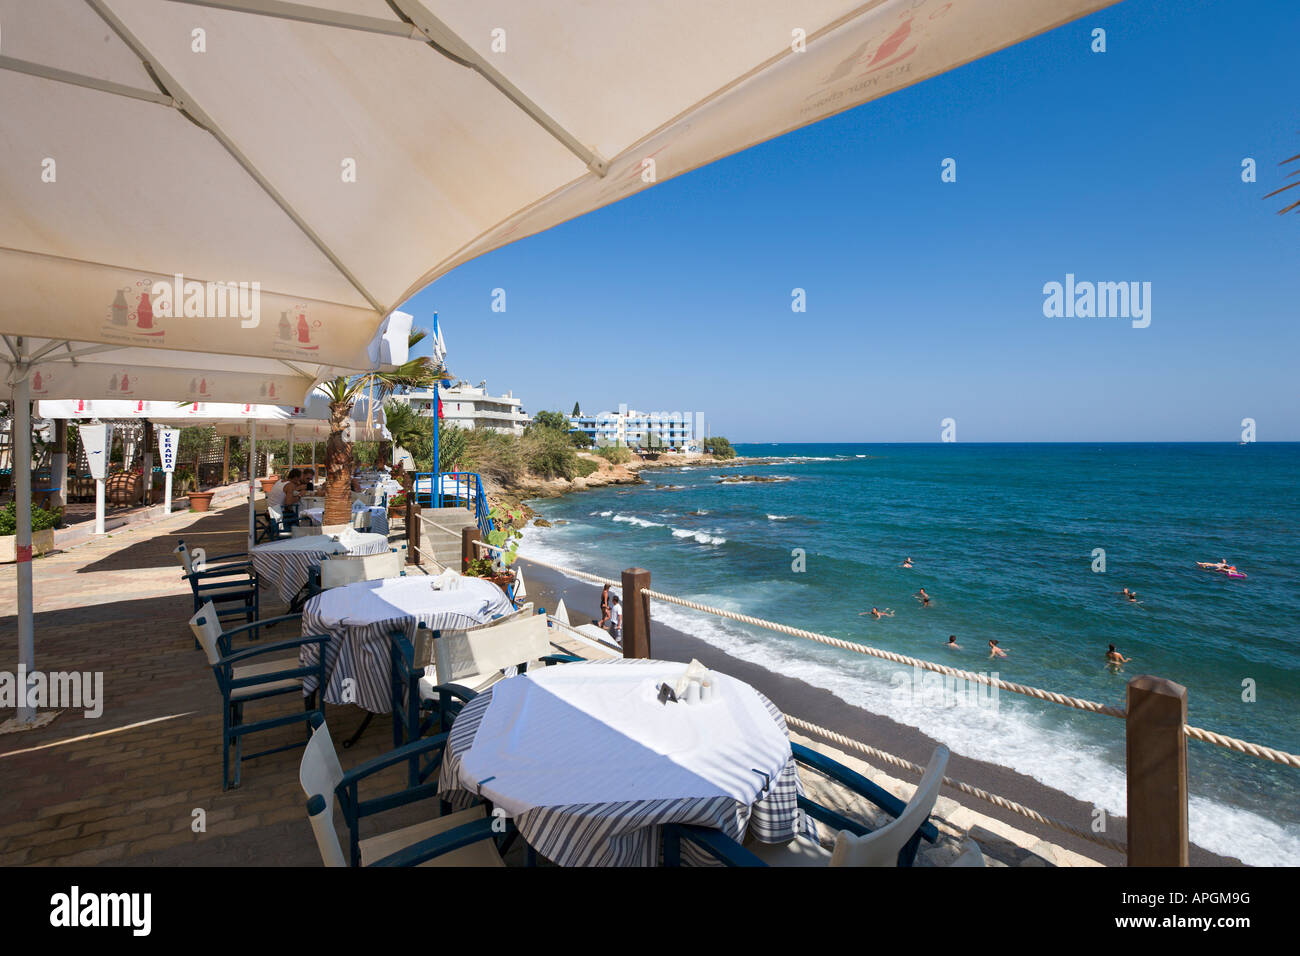 Beach Taverna Crete High Resolution Stock Photography and Images - Alamy